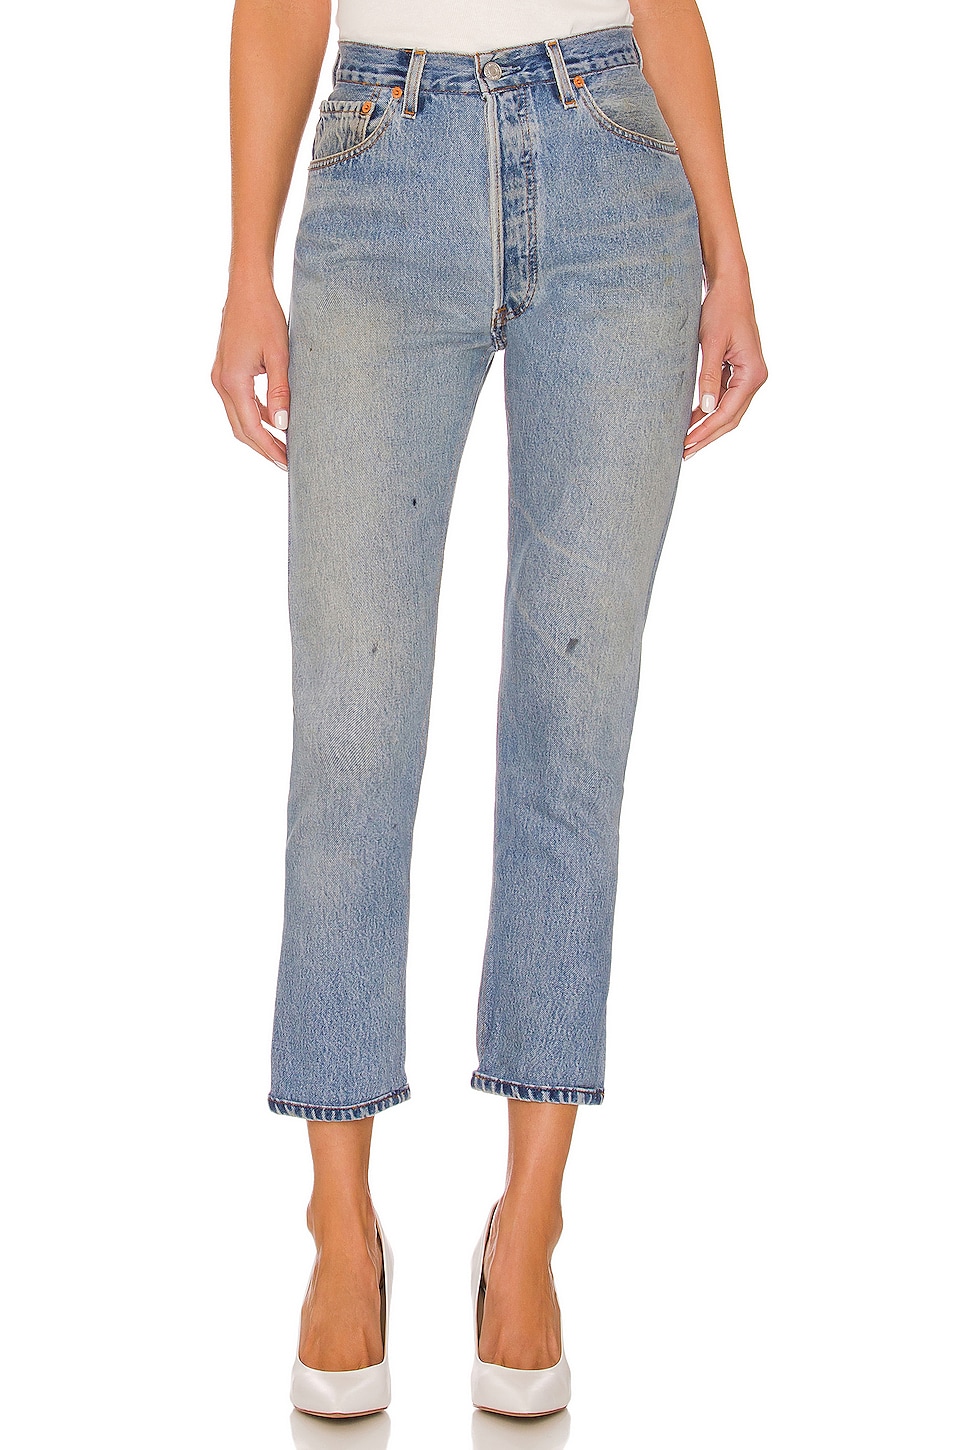 RE/DONE Levis High Rise Ankle Crop in Indigo | REVOLVE